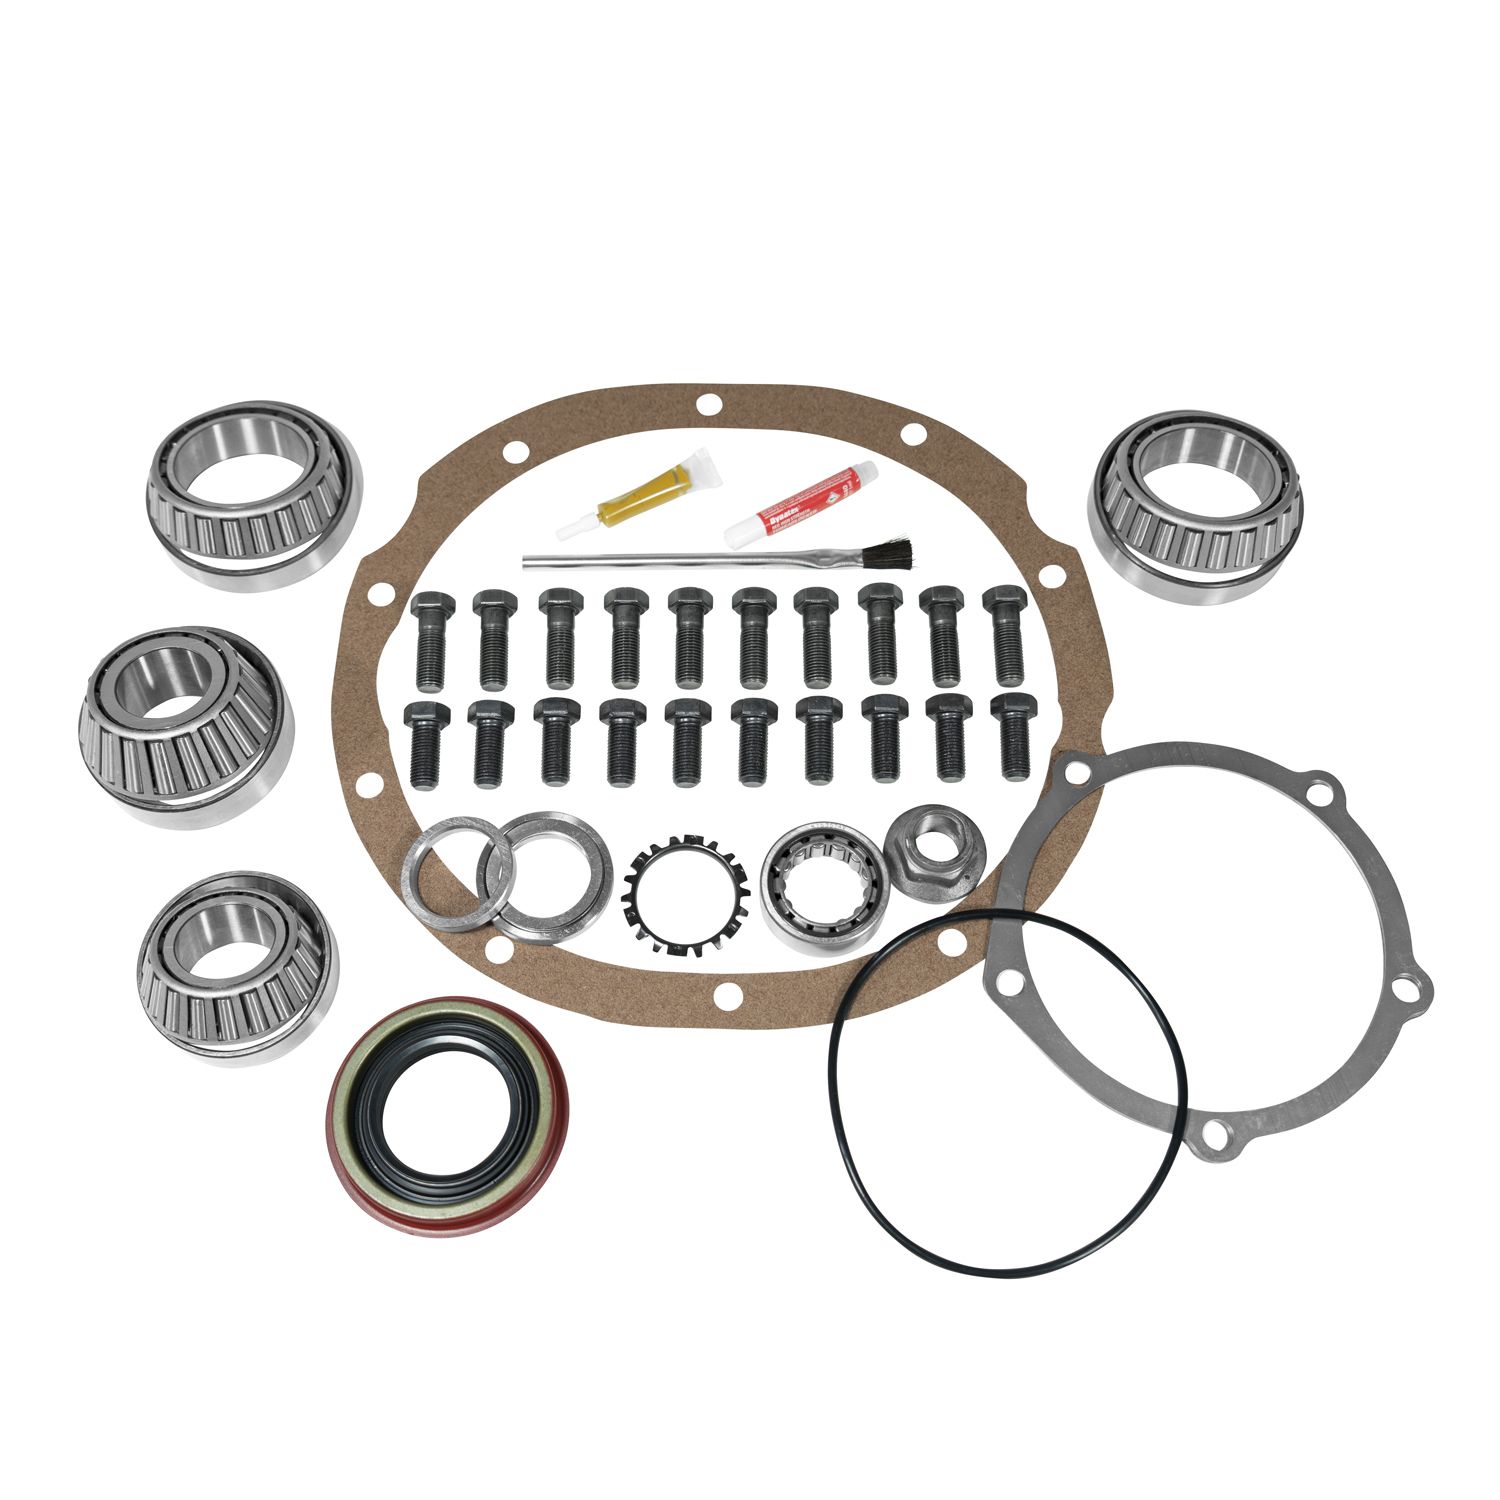 Yukon Master Overhaul kit for Ford 9" LM501310 differential 